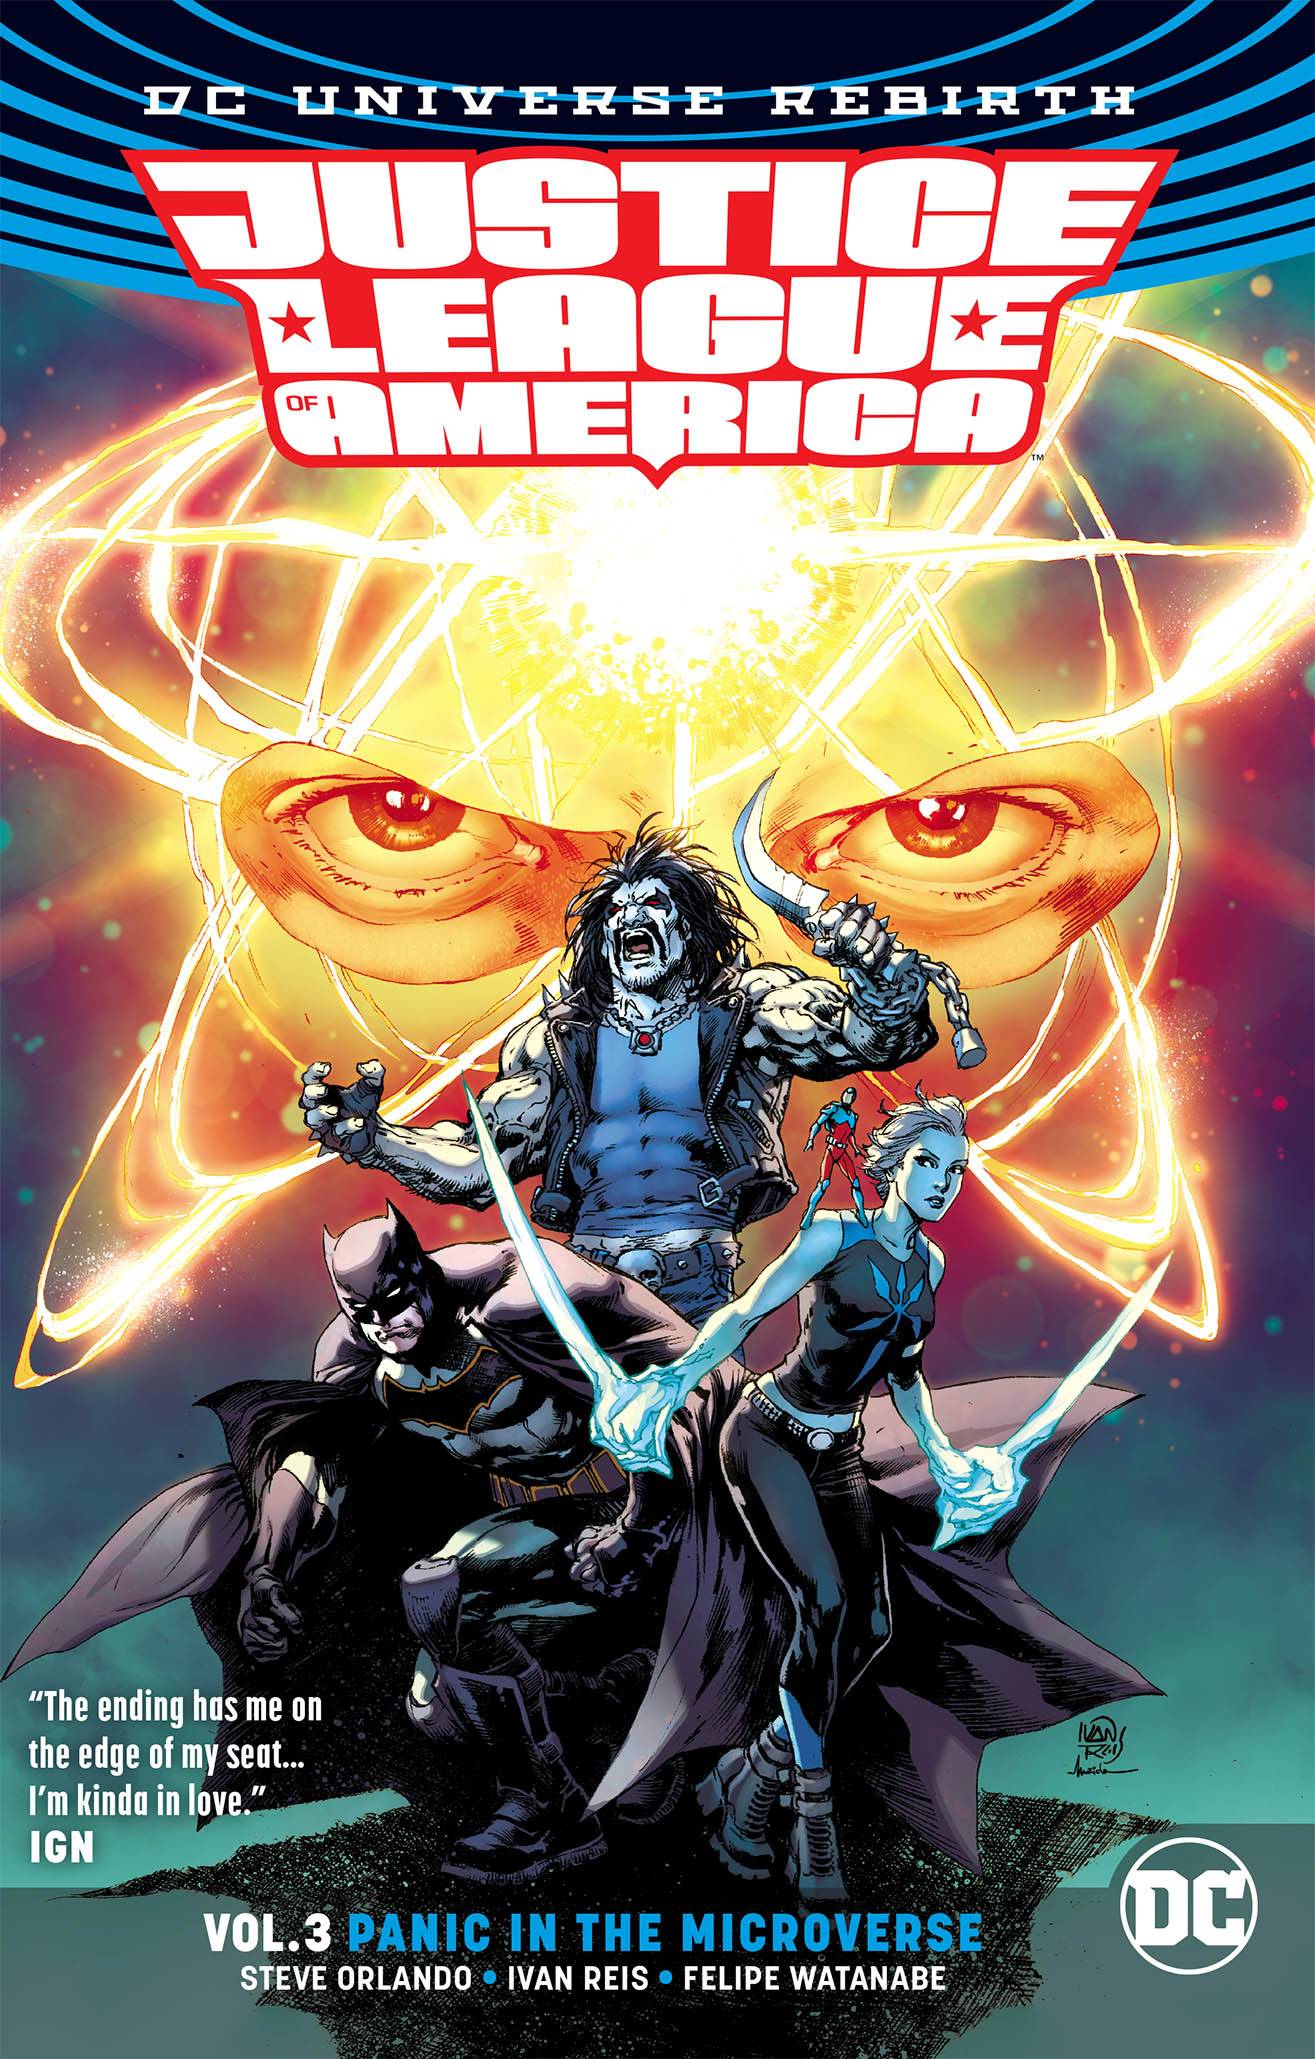 Justice League of America Graphic Novel Volume 3 Panic Microverse Rebirth